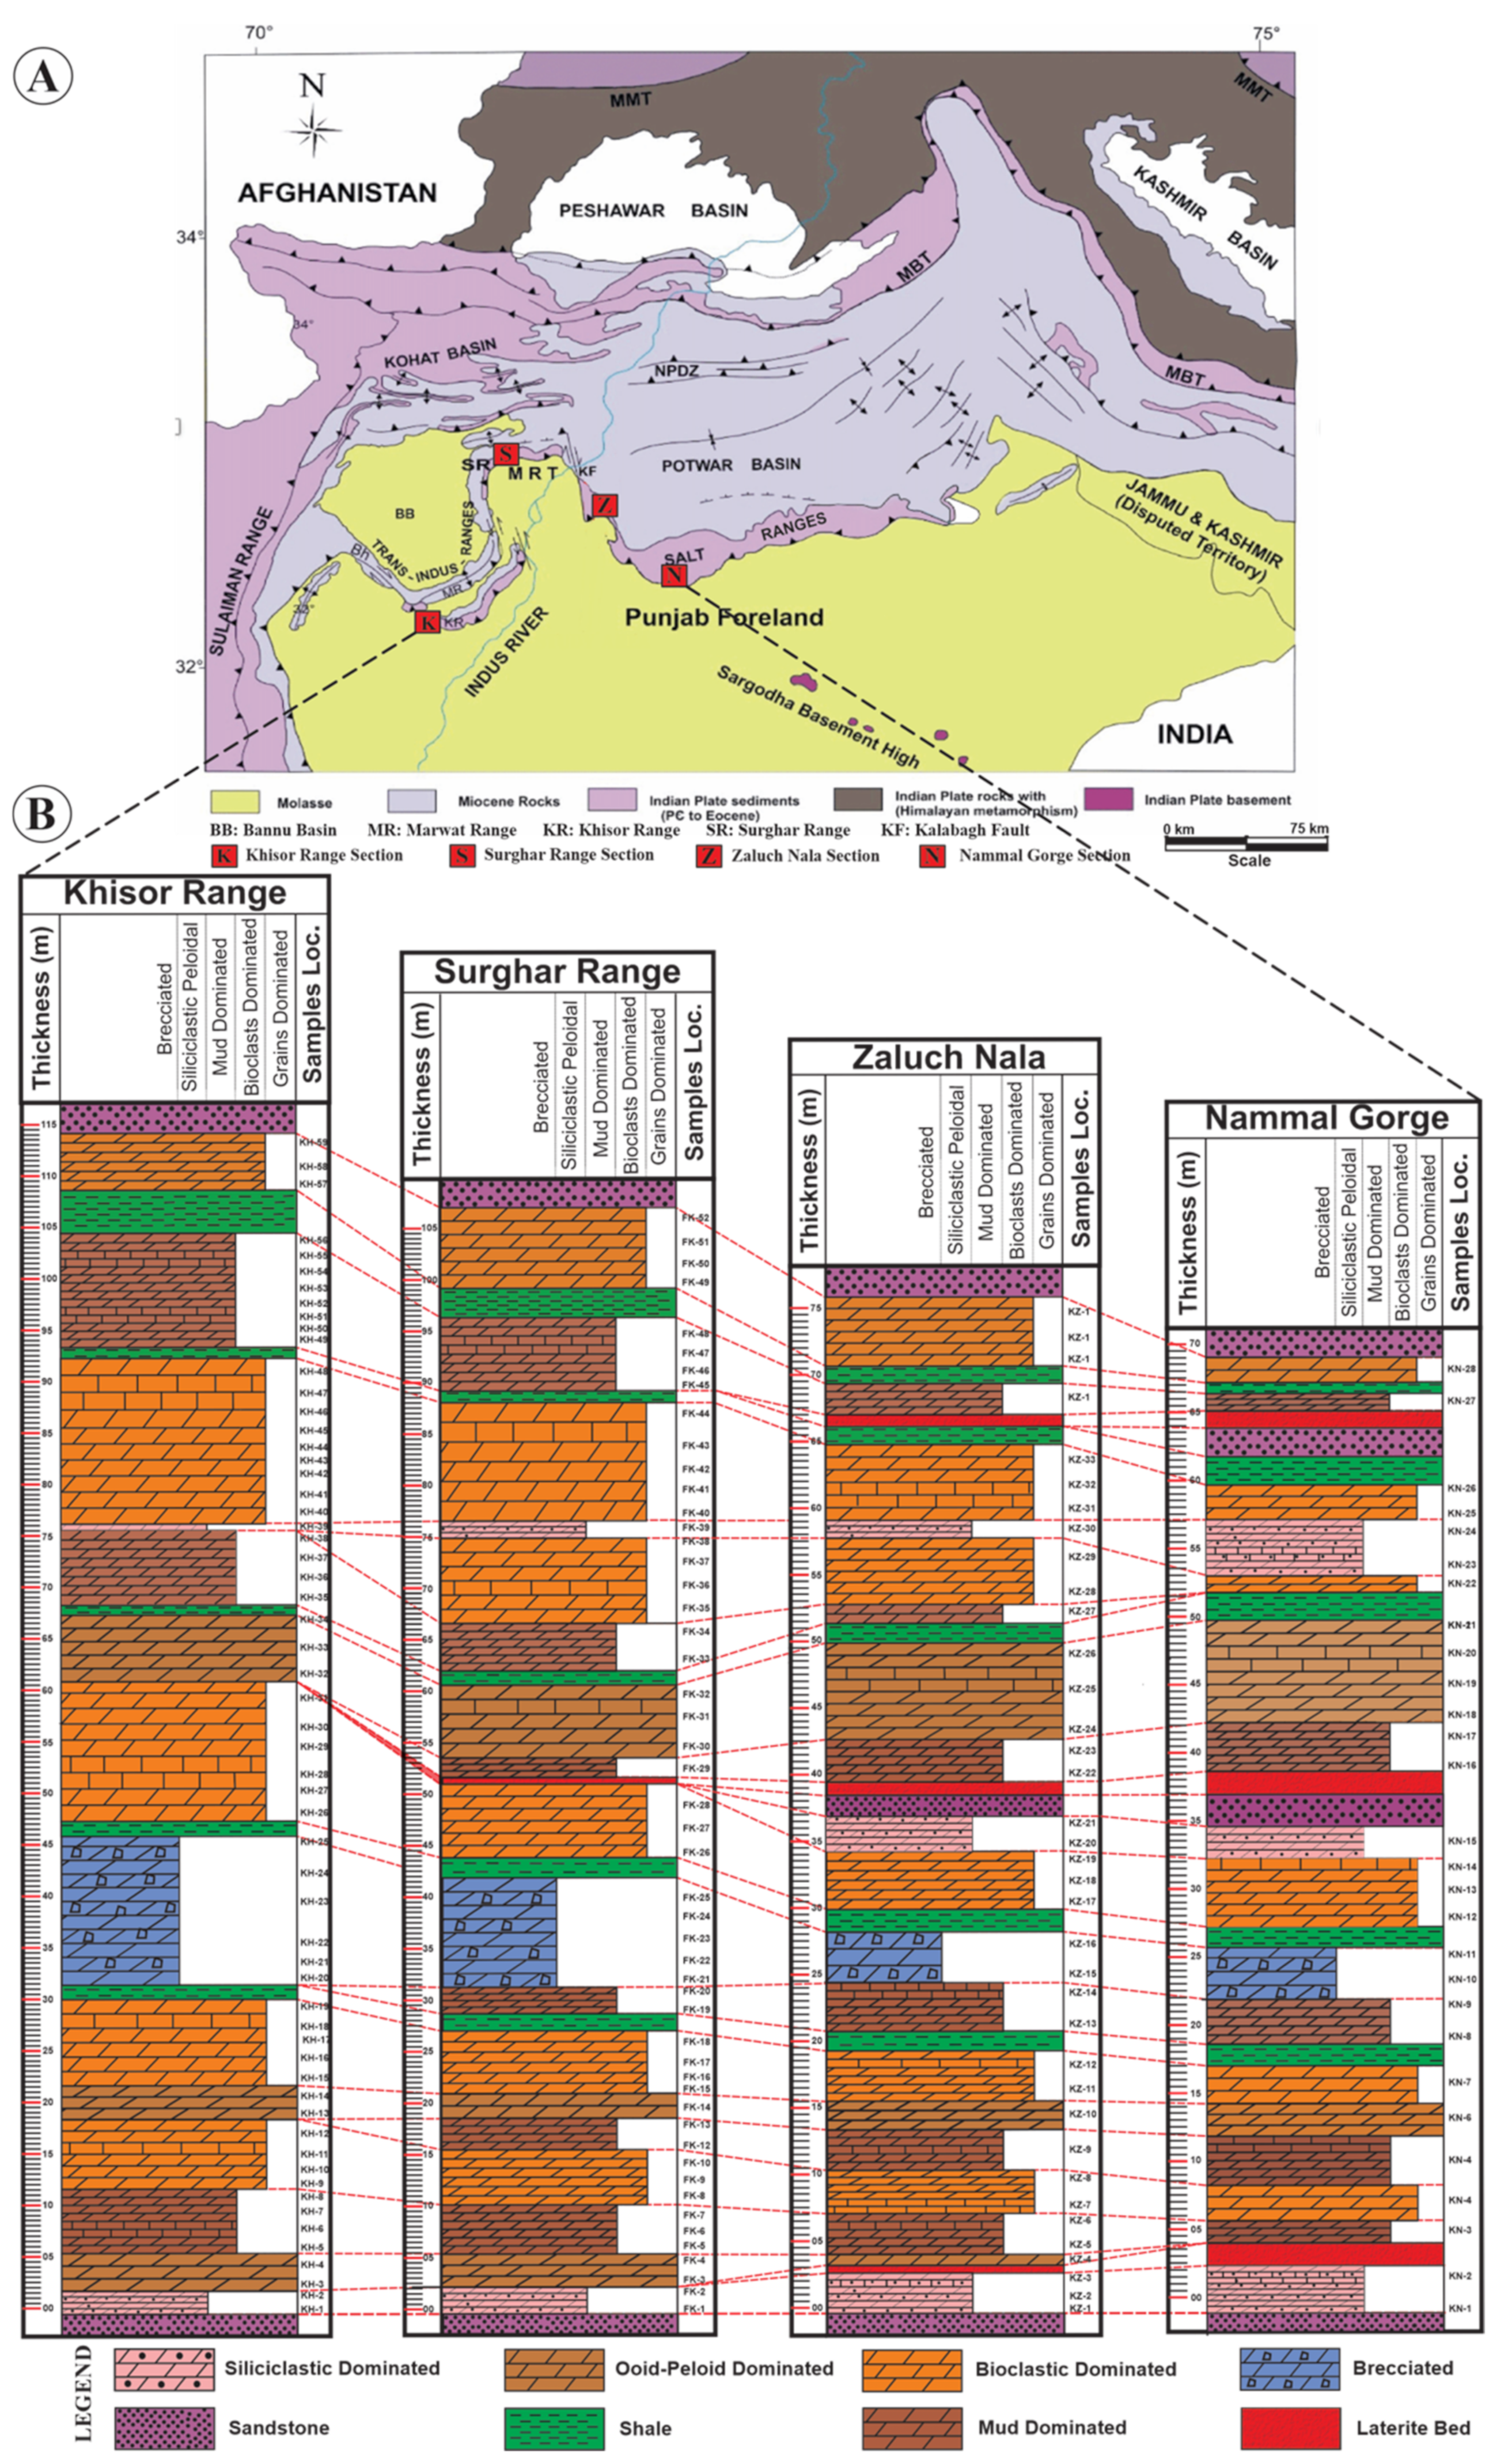 Minerals | Free Full-Text | Multiphase Diagenetic Processes and Their  Impact on Reservoir Character of the Late Triassic (Rhaetian) Kingriali  Formation, Upper Indus Basin, Pakistan | HTML